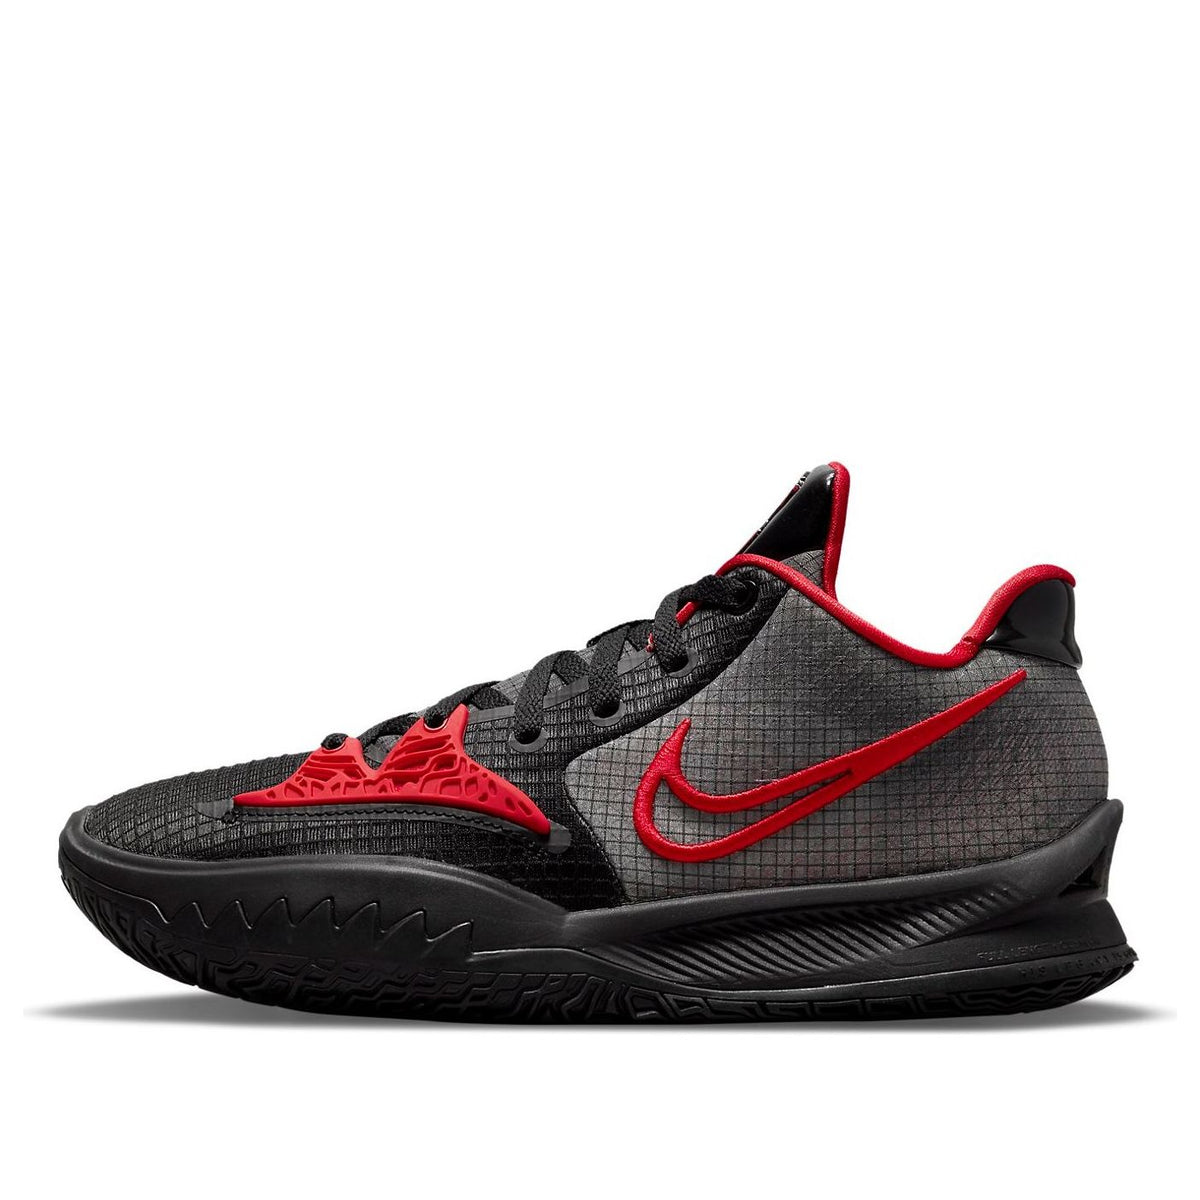 Nike Kyrie Low 4 EP 'Bred' CZ0105-006